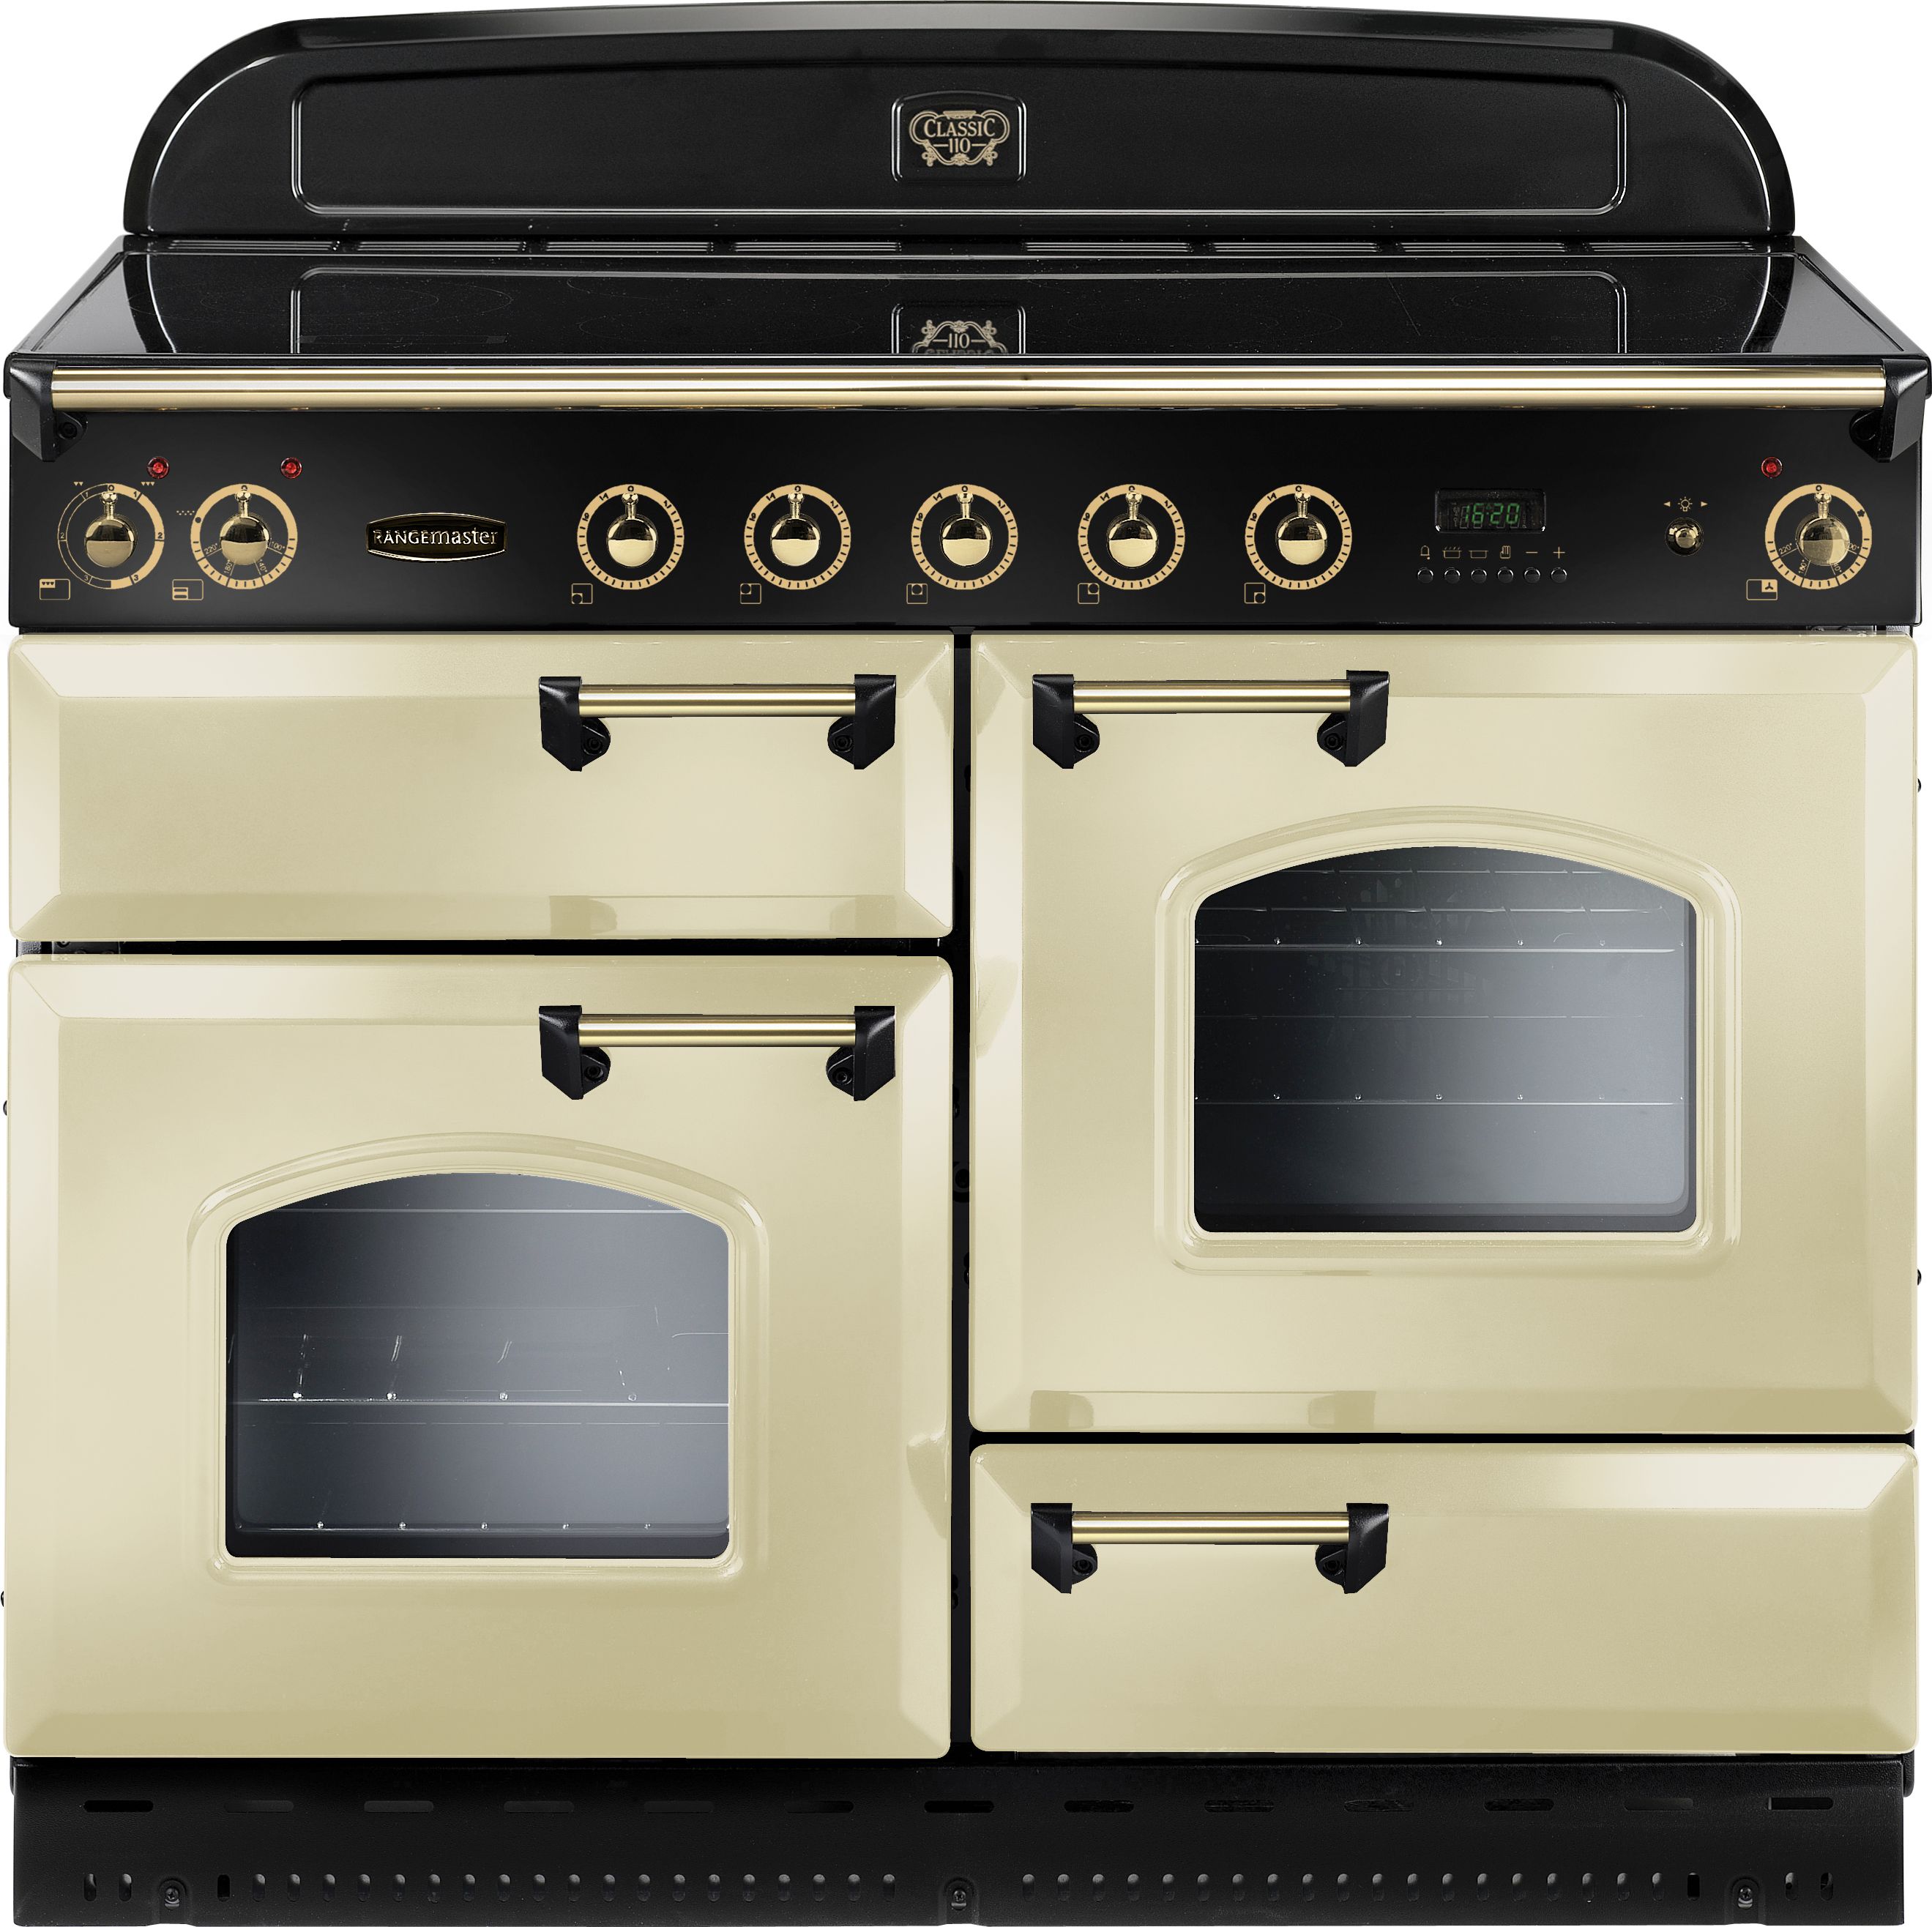 Rangemaster Classic Deluxe CDL110EICR/B 110cm Electric Range Cooker with Induction Hob - Cream / Brass - A/A Rated, Cream